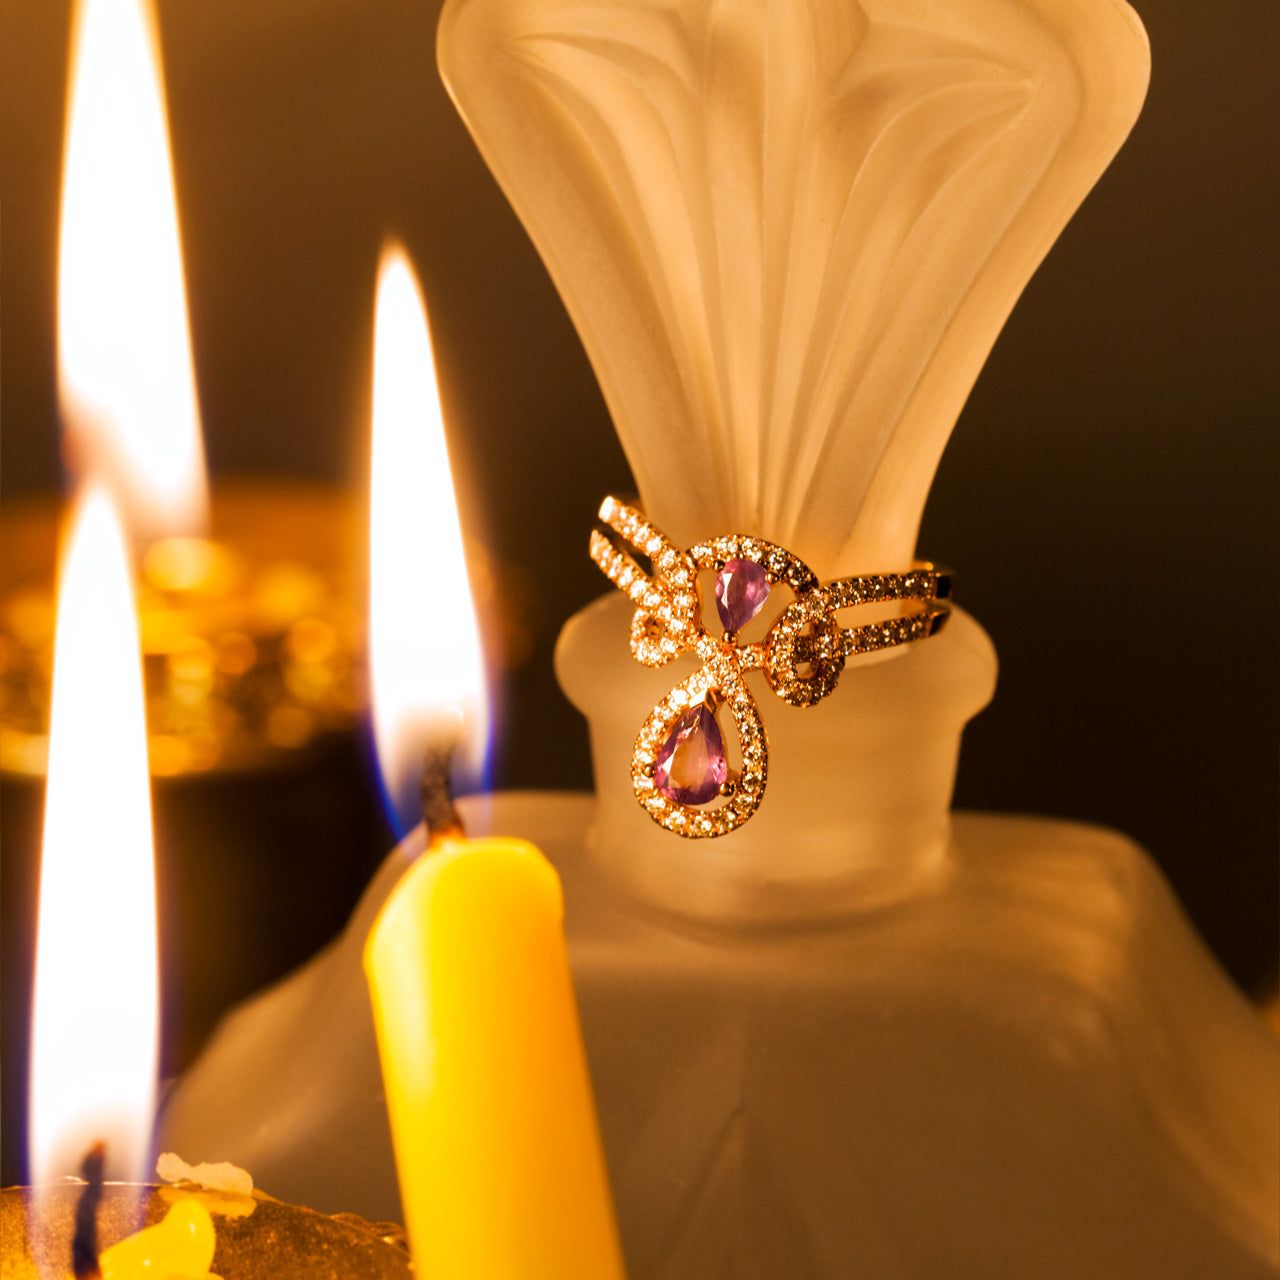 0.54ct alexandrite ring in 18k rose gold setting beside a lit candle